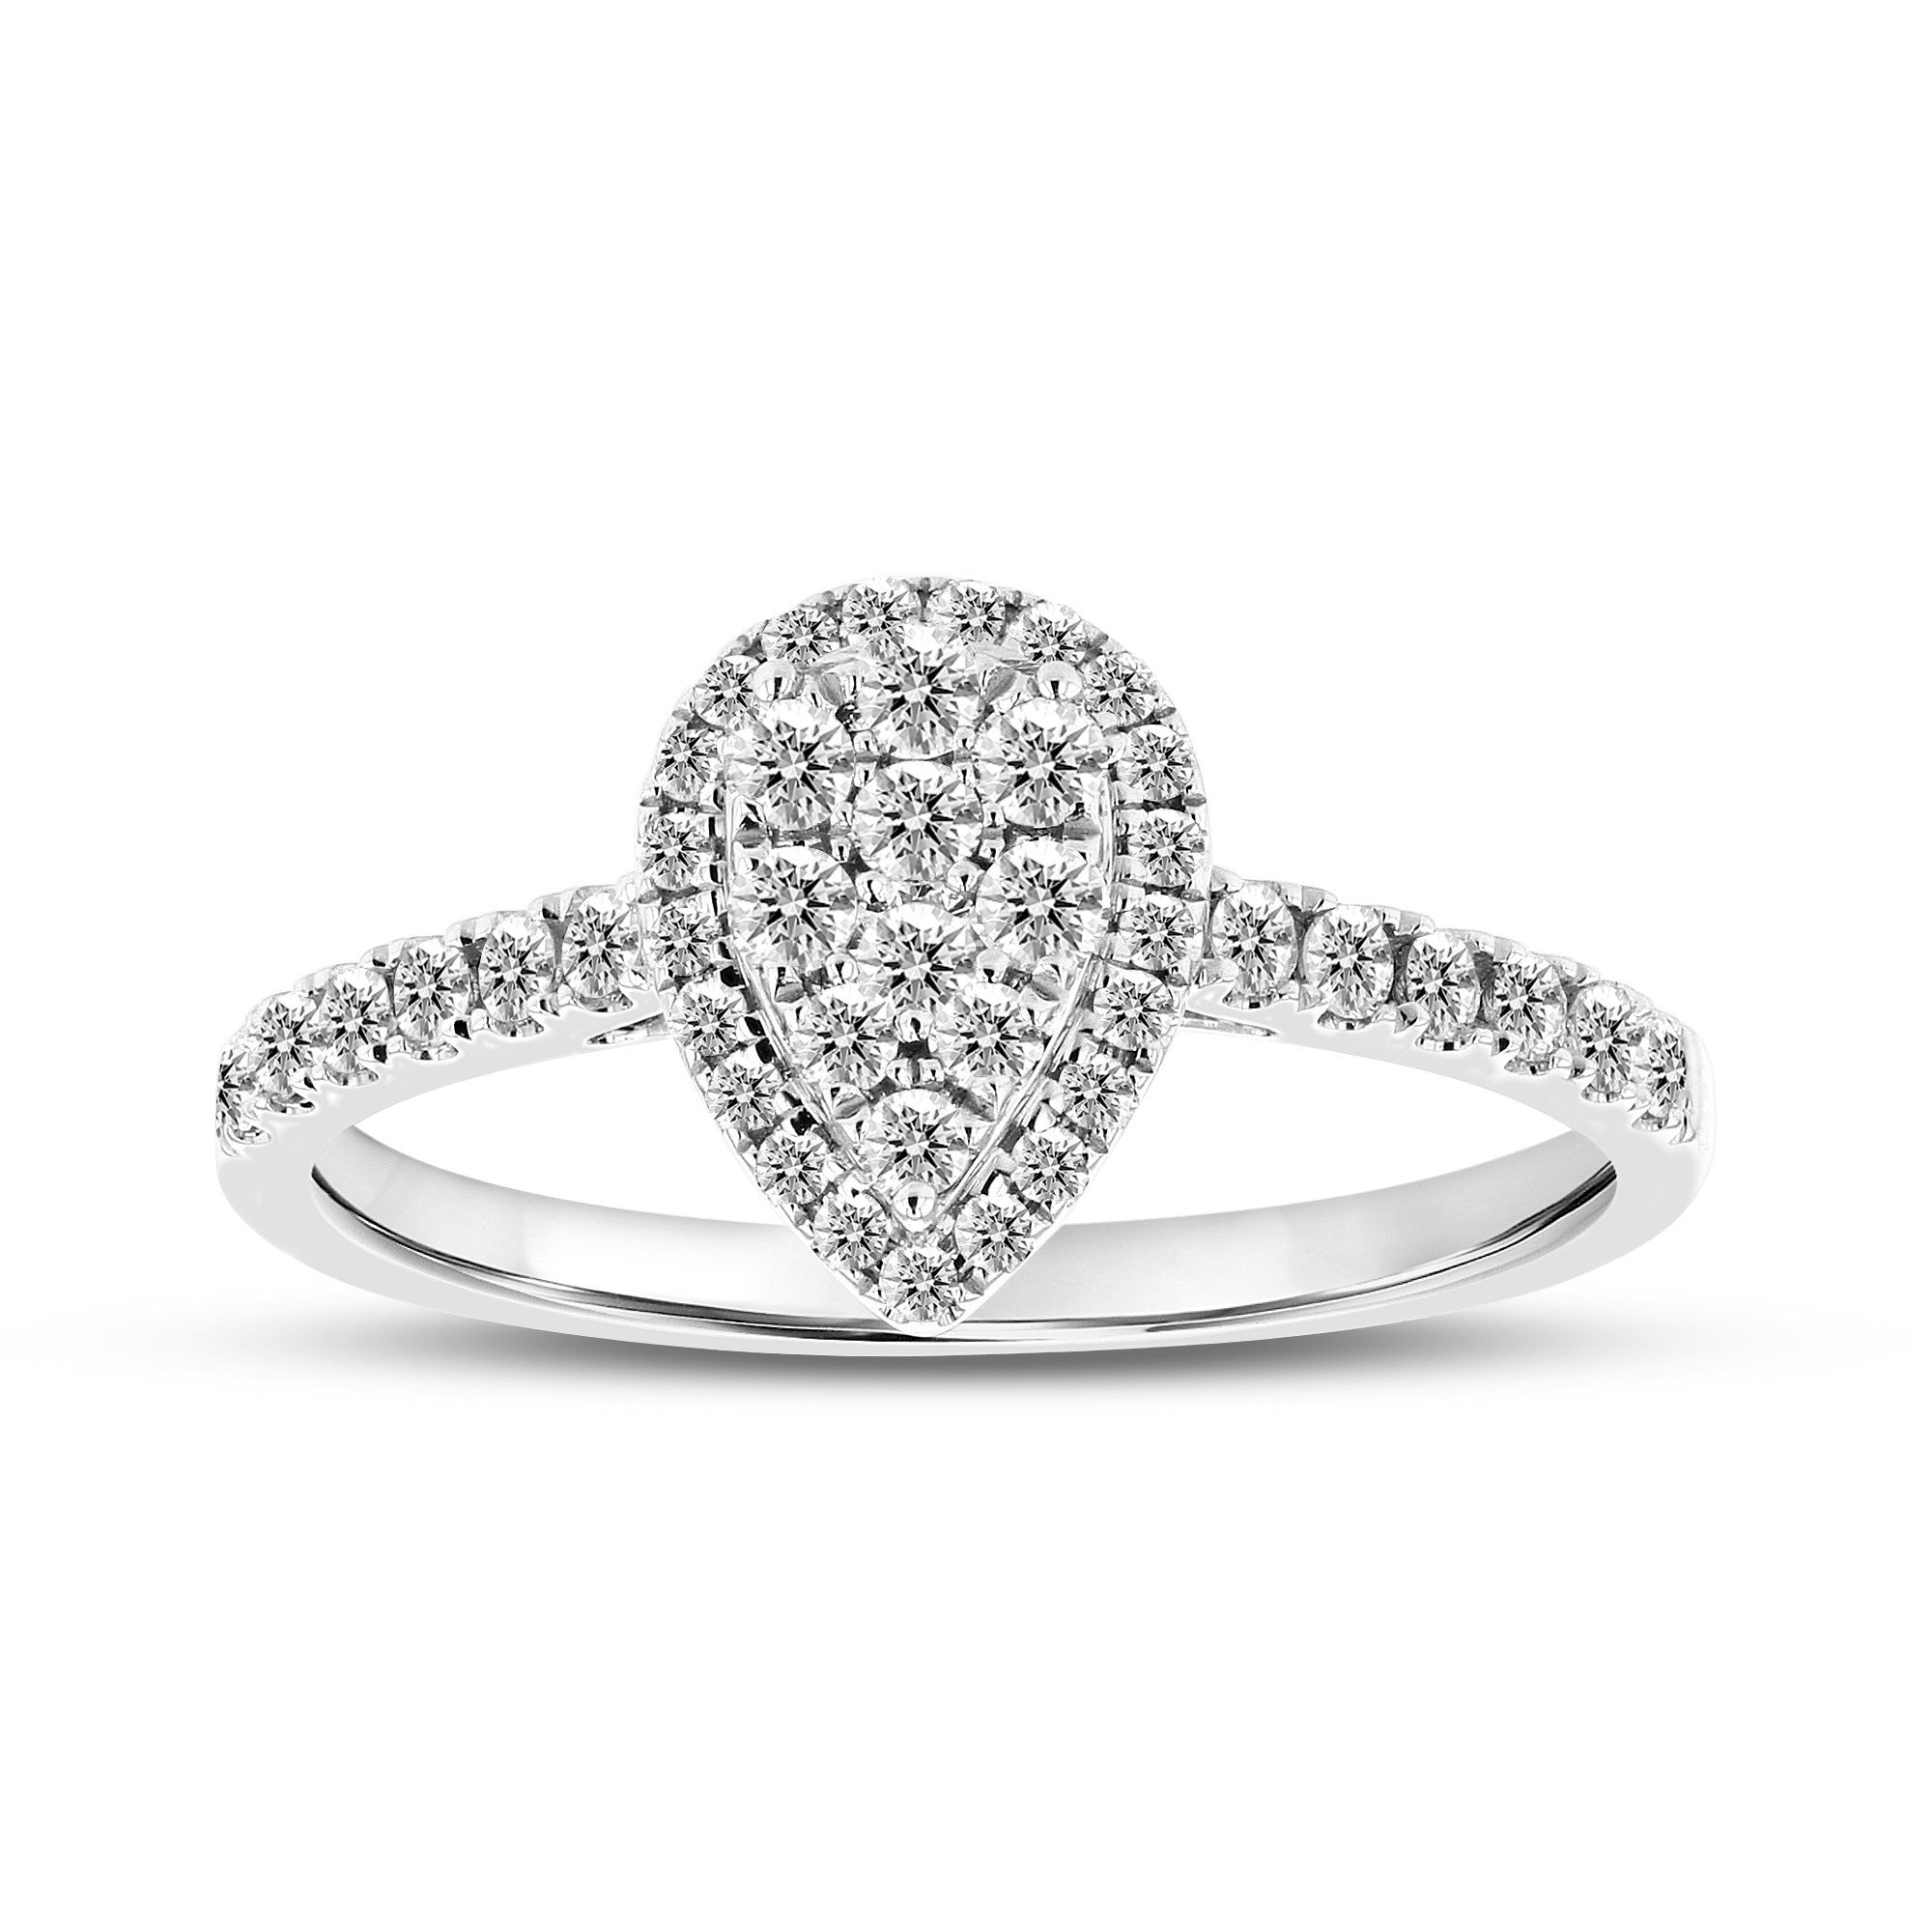 View 0.52ctw Diamond Pear Shaped Cluster Ring in 14k White Gold